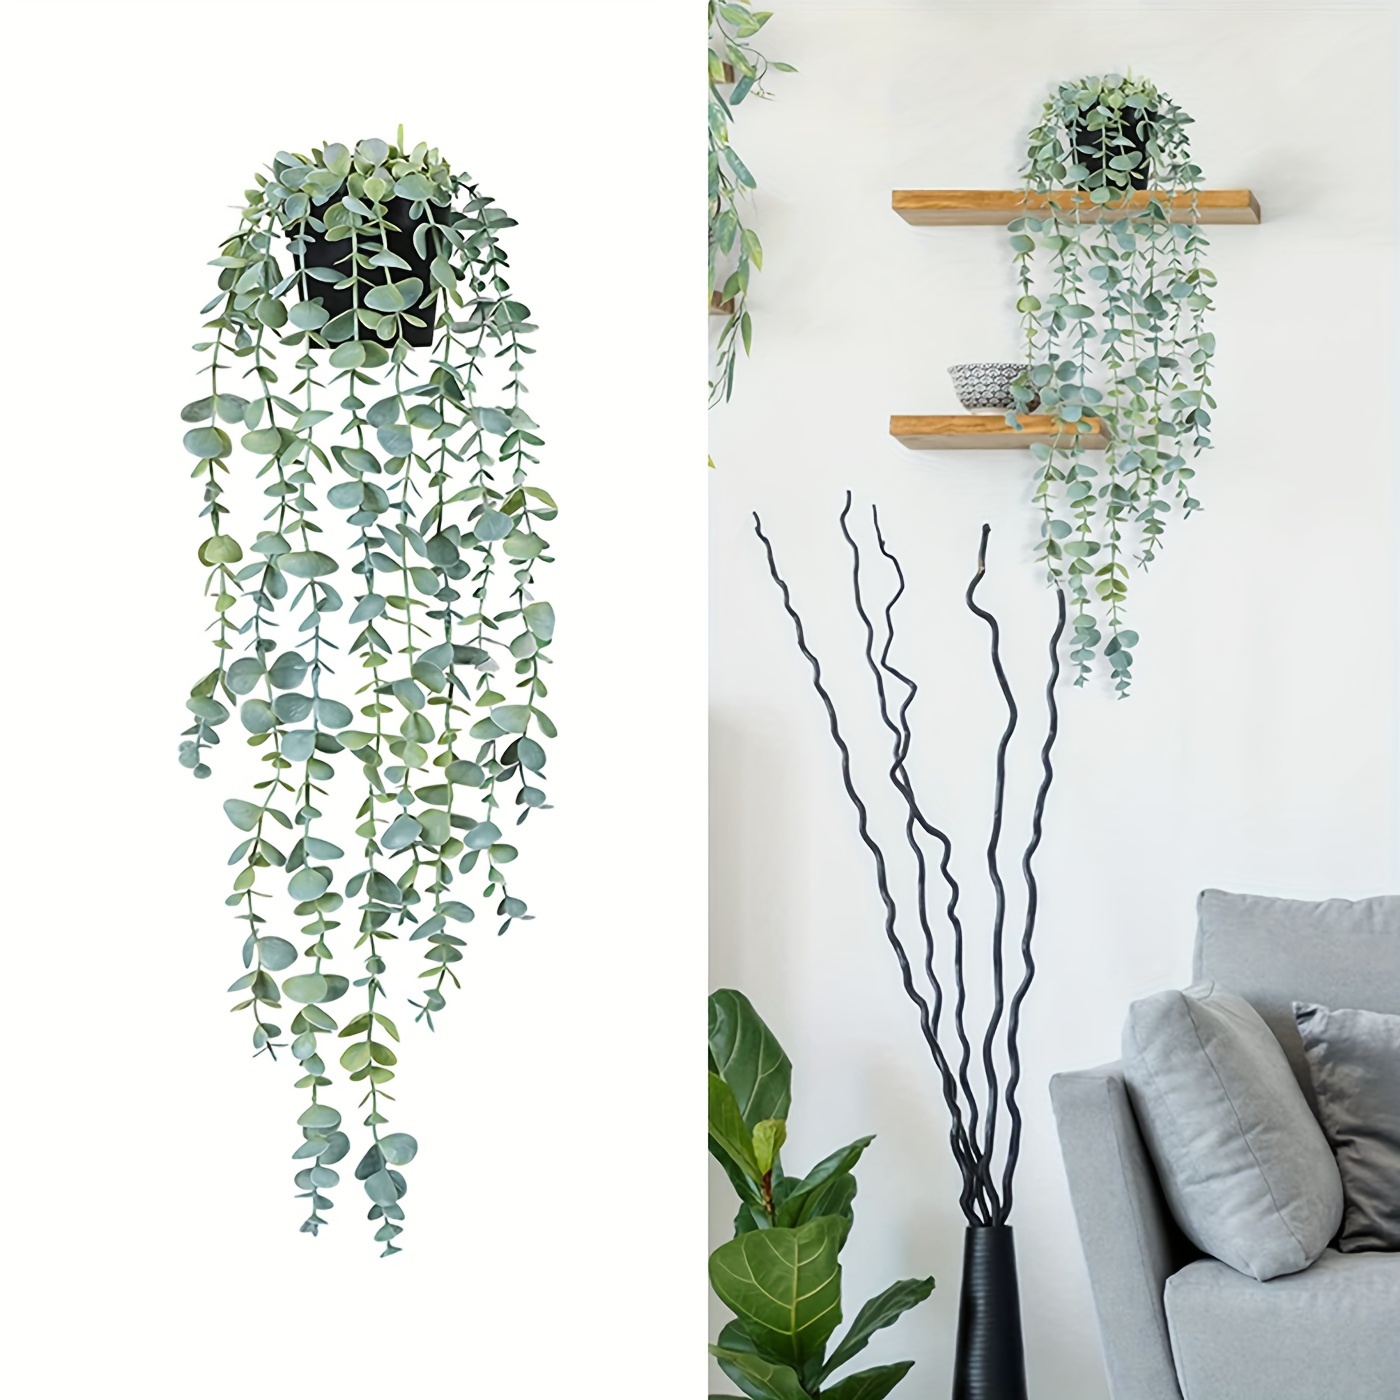 

1pc, Artificial Hanging Plants, Eucalyptus Leaves Vines Fake Potted Set, Artificial Eucalyptus Plants Hanging Plants Wall Room Home Indoor Outdoor Shelf Decor, Home Decor, Office Ornaments